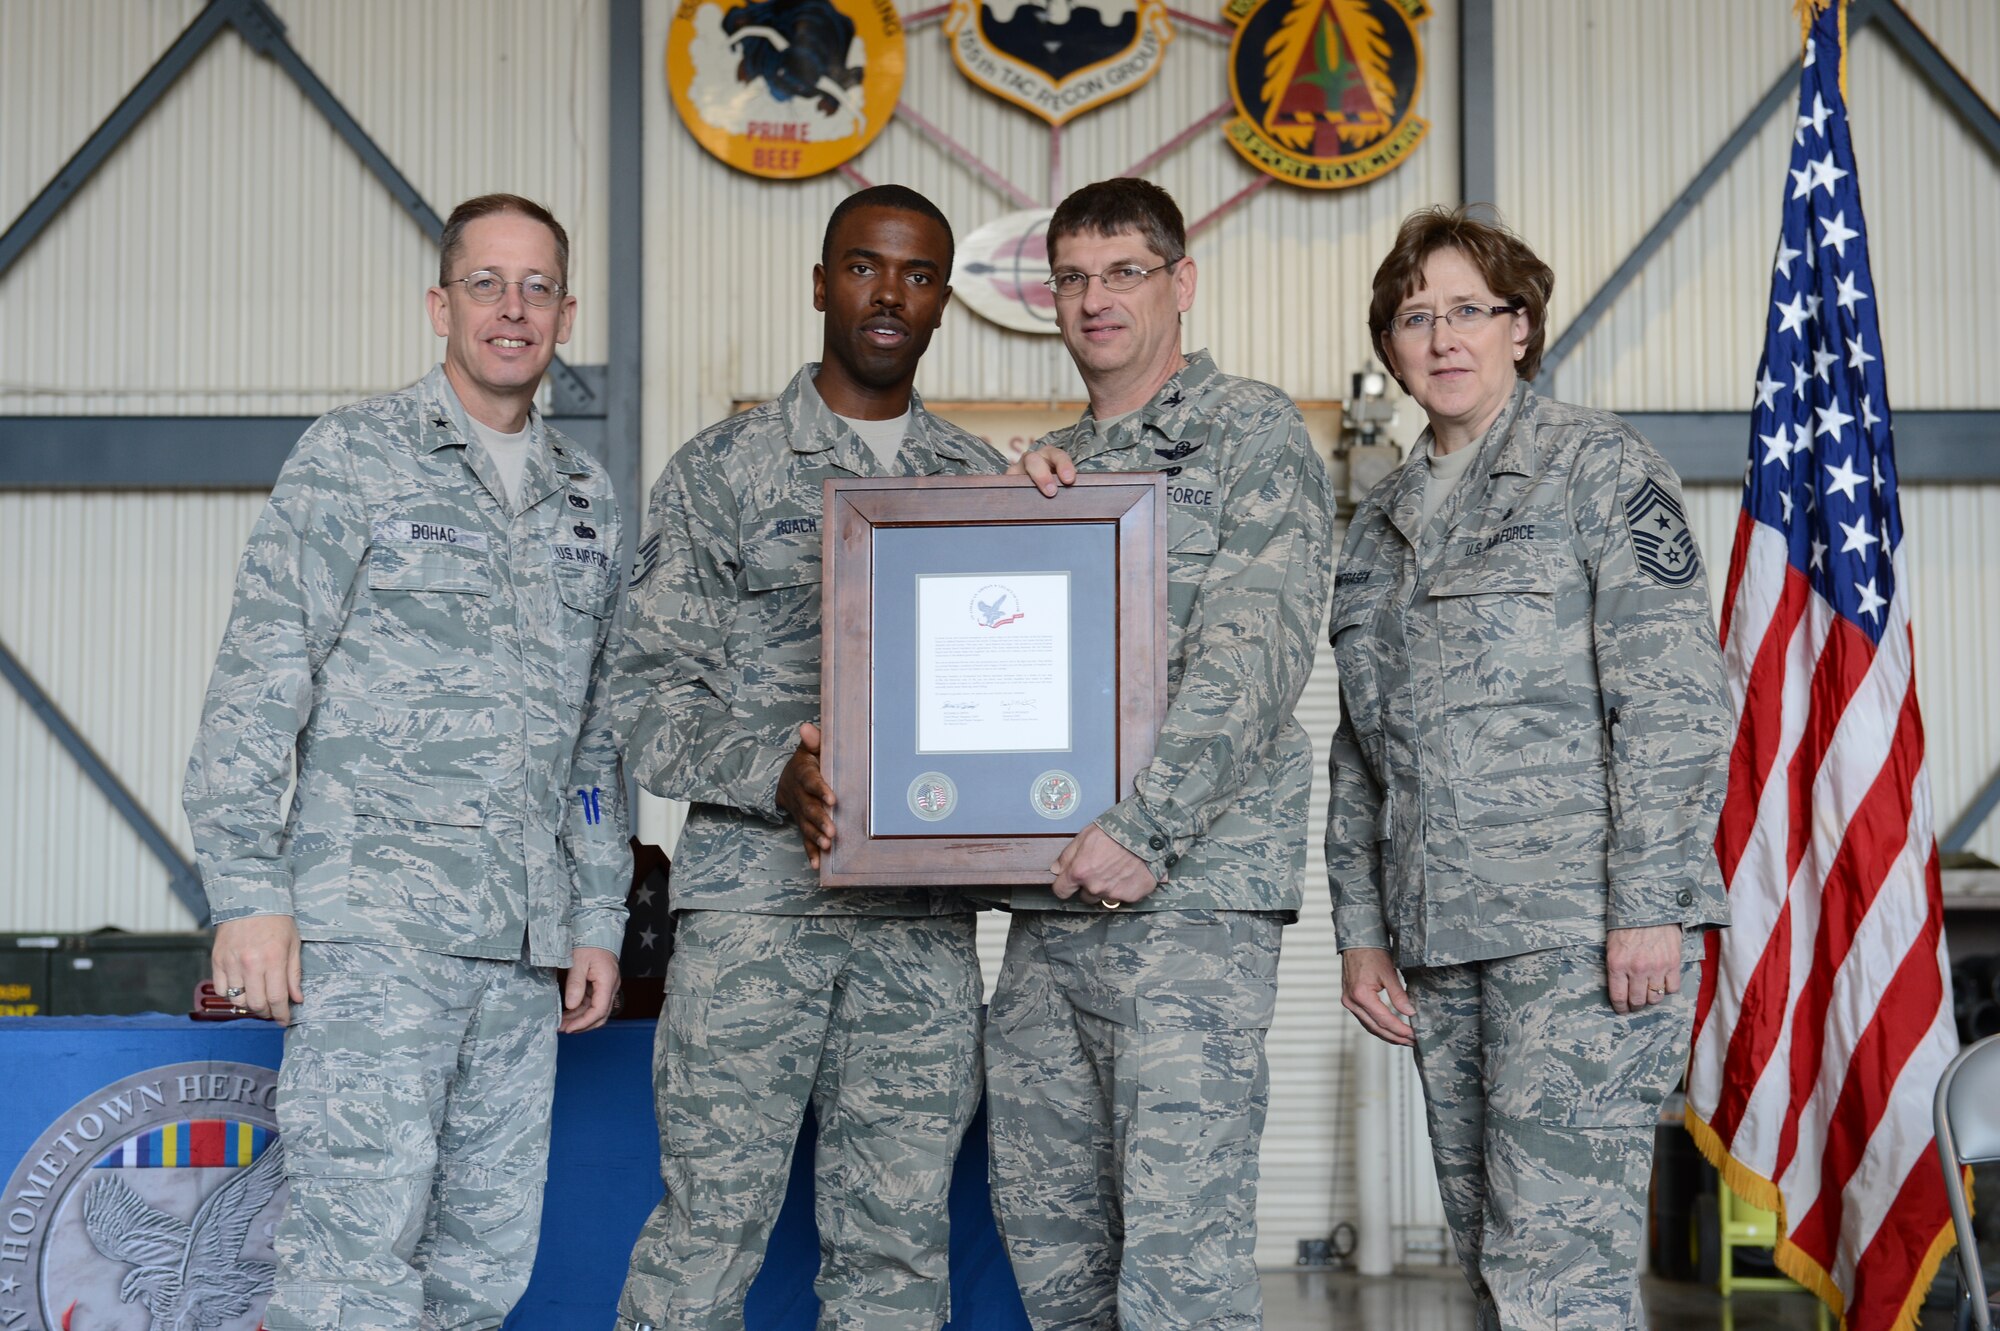 Brig. Gen. Daryl Bohac, Nebraska National Guard's assistant adjutant general-Air, along with Col. Keith Schell, commander of the 155th Air Refueling Wing and Chief Nancy Vondrasek, the 155th ARW Command Chief award Staff Sgt. Jarrell Roach, a civil engineer structural maintainer, at the Hometown Heroes Salute Ceremony, April 6, 2013, at the Nebraska National Guard air base in Lincoln, Neb. The ceremony is used to honor the family members, friends and deployed unit members who sacrificed so much for freedom during a deployment. (U.S. Air National Guard Photo by Staff Sgt. James Lieth/released)